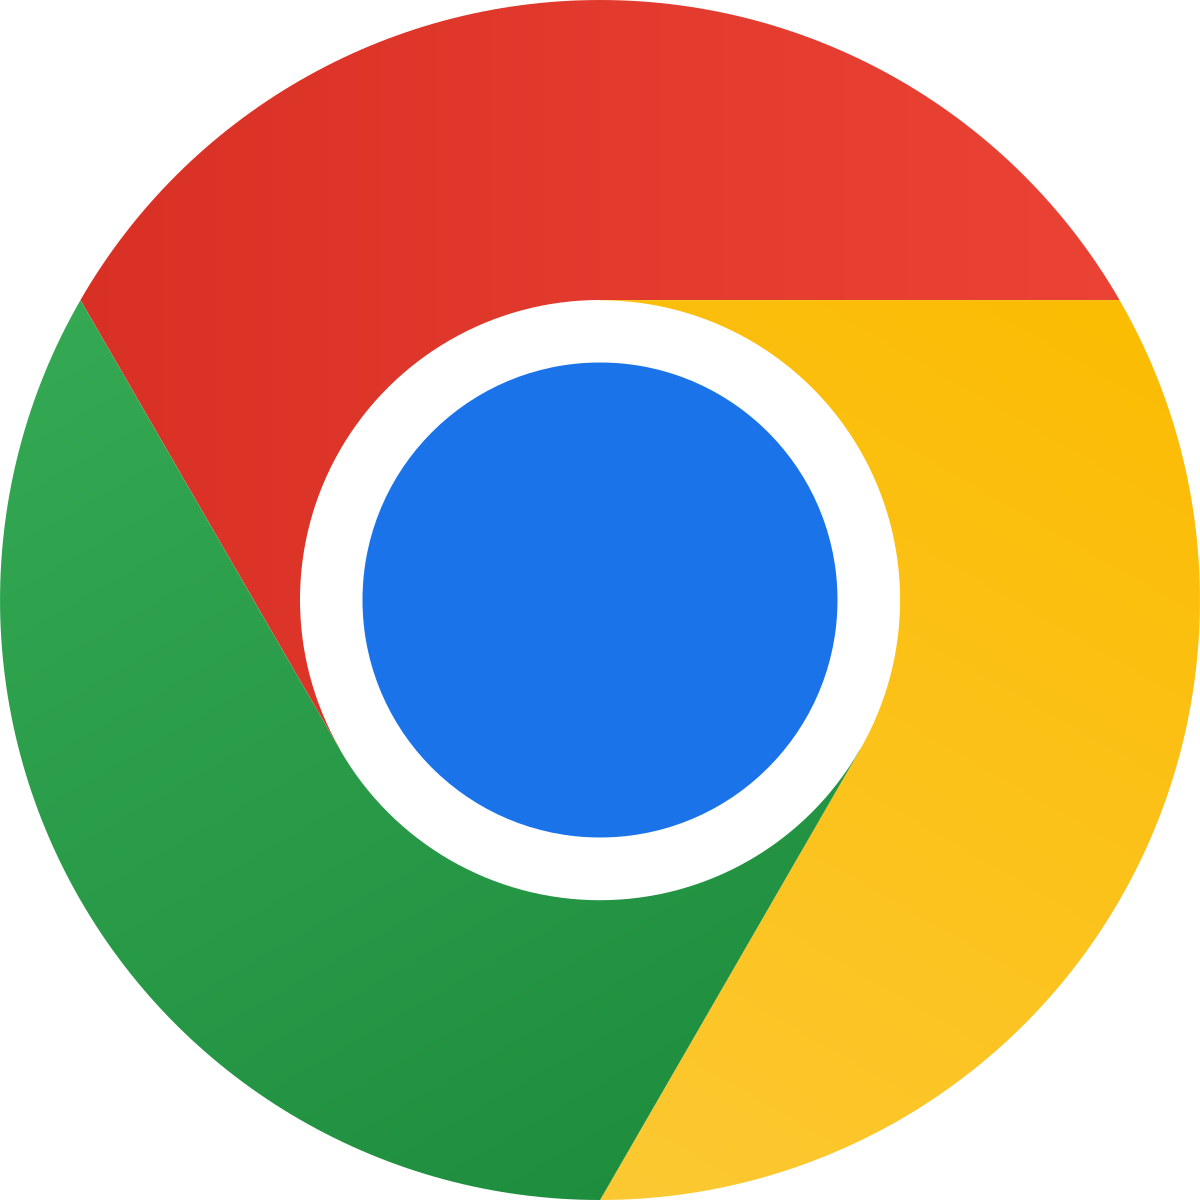 Google Chrome: A web browser developed by Google.
Mozilla Firefox: An open-source web browser known for its speed and privacy features.